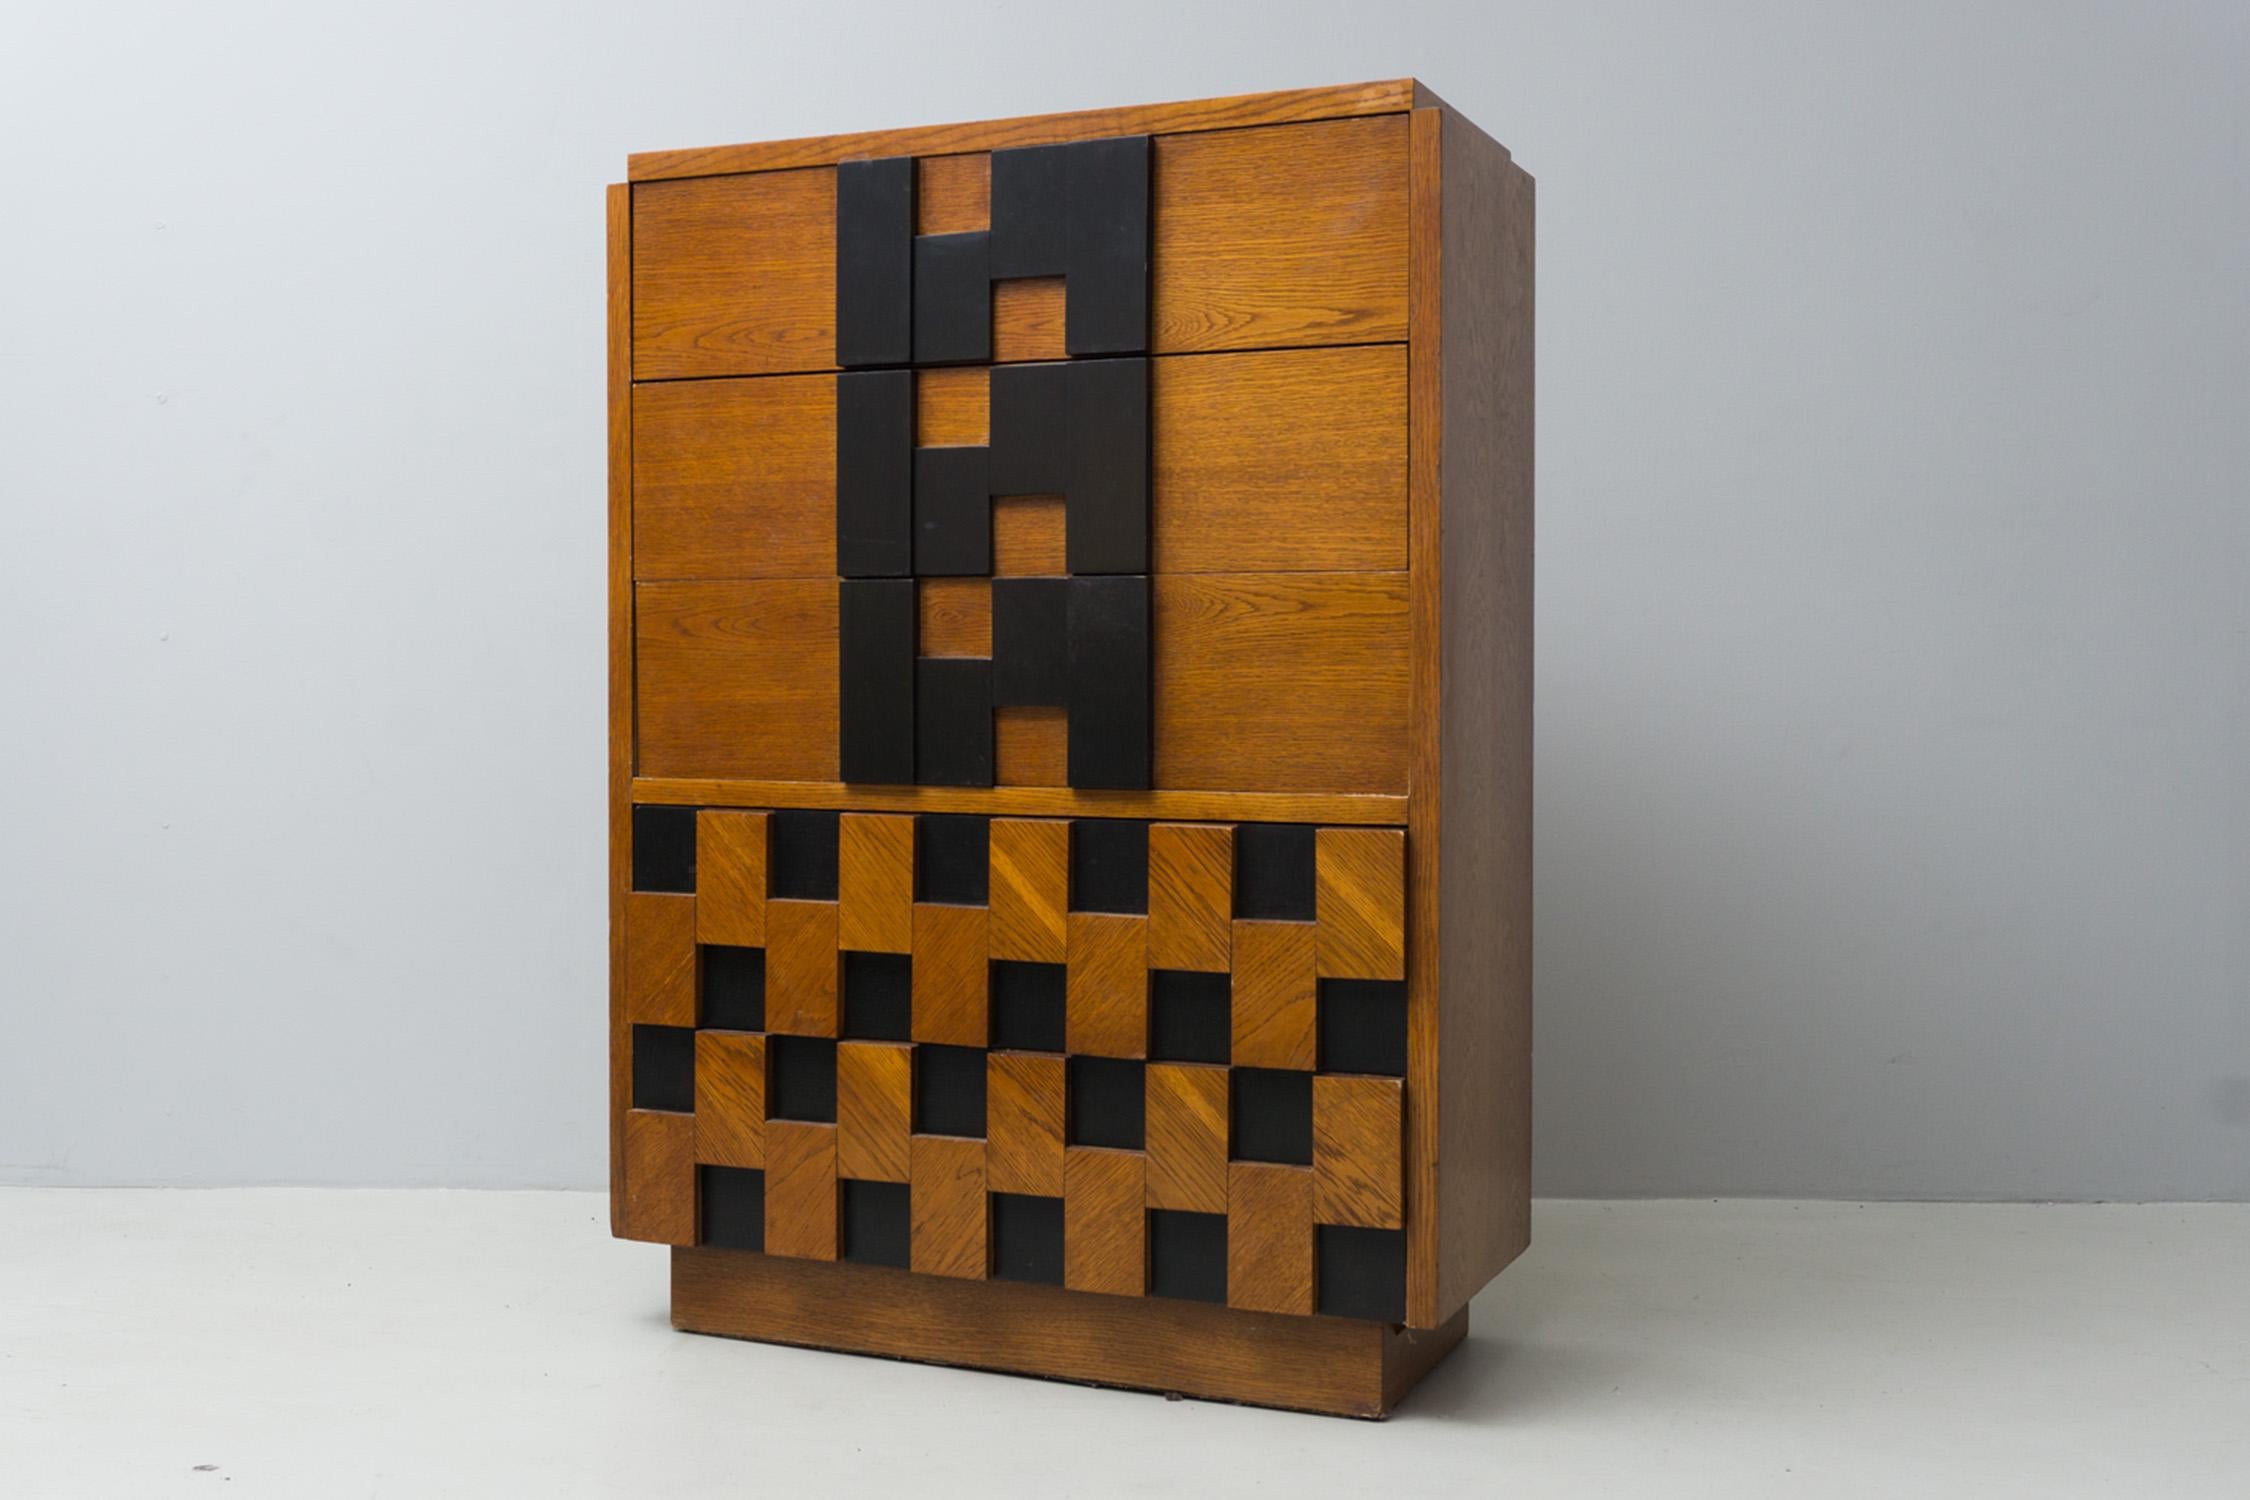 This eccentric and elegant chest of drawers is made of walnut veneered wood and is partially lacquered in black.
Designed by an unknown designer, stamped in drawer 'Lane Altavista Virginia', Ca. 1965.